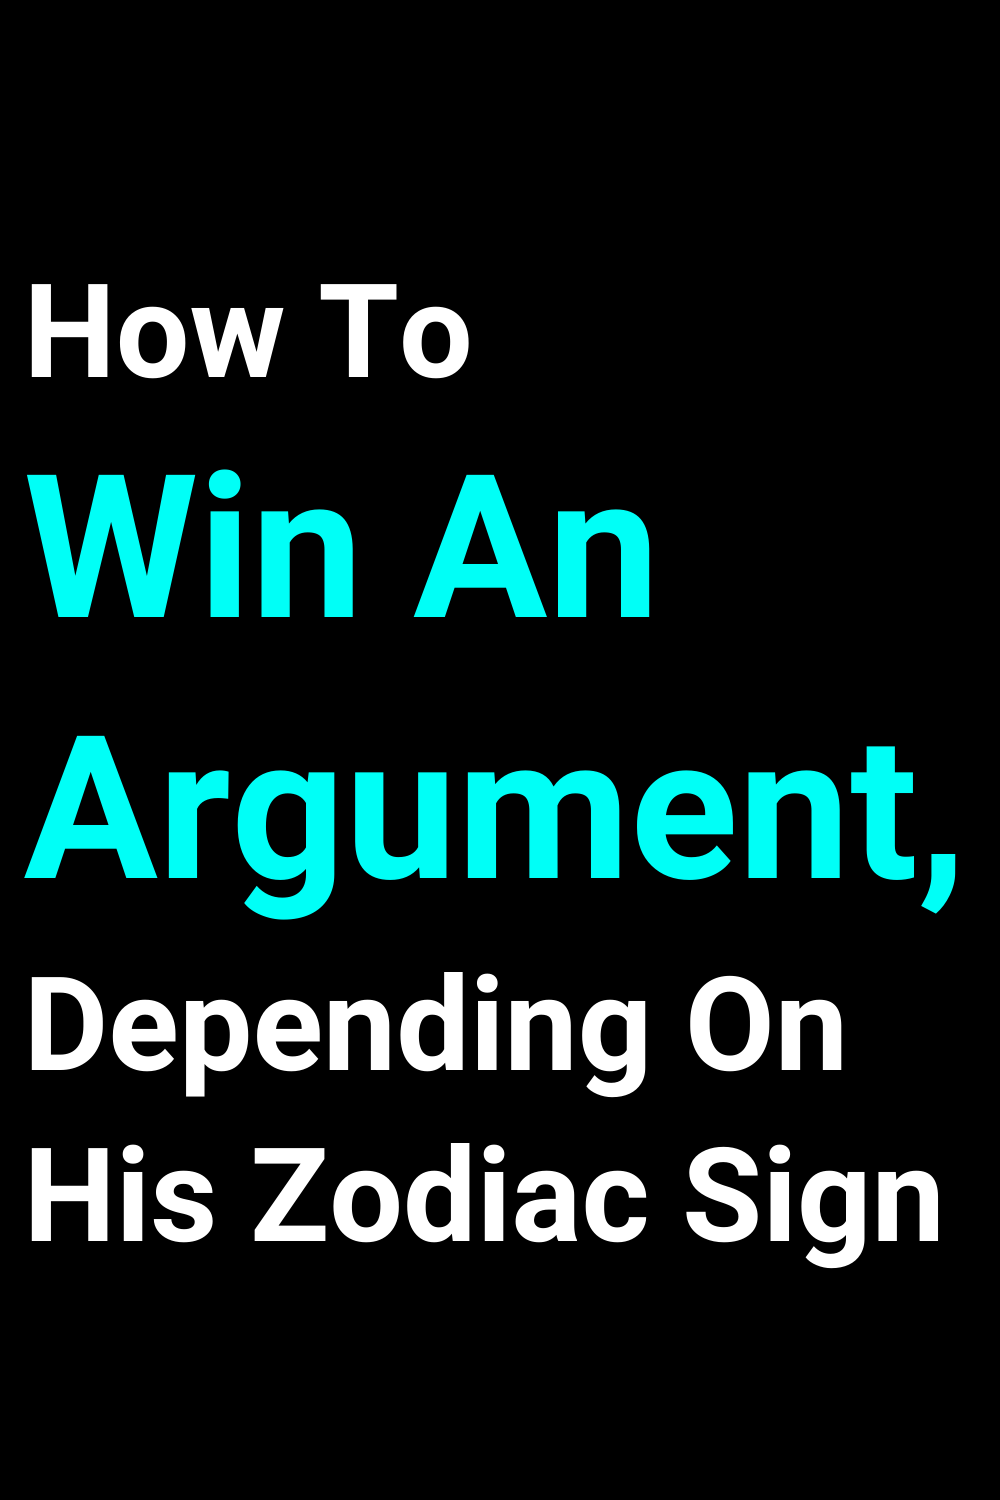 How To Win An Argument, Depending On His Zodiac Sign